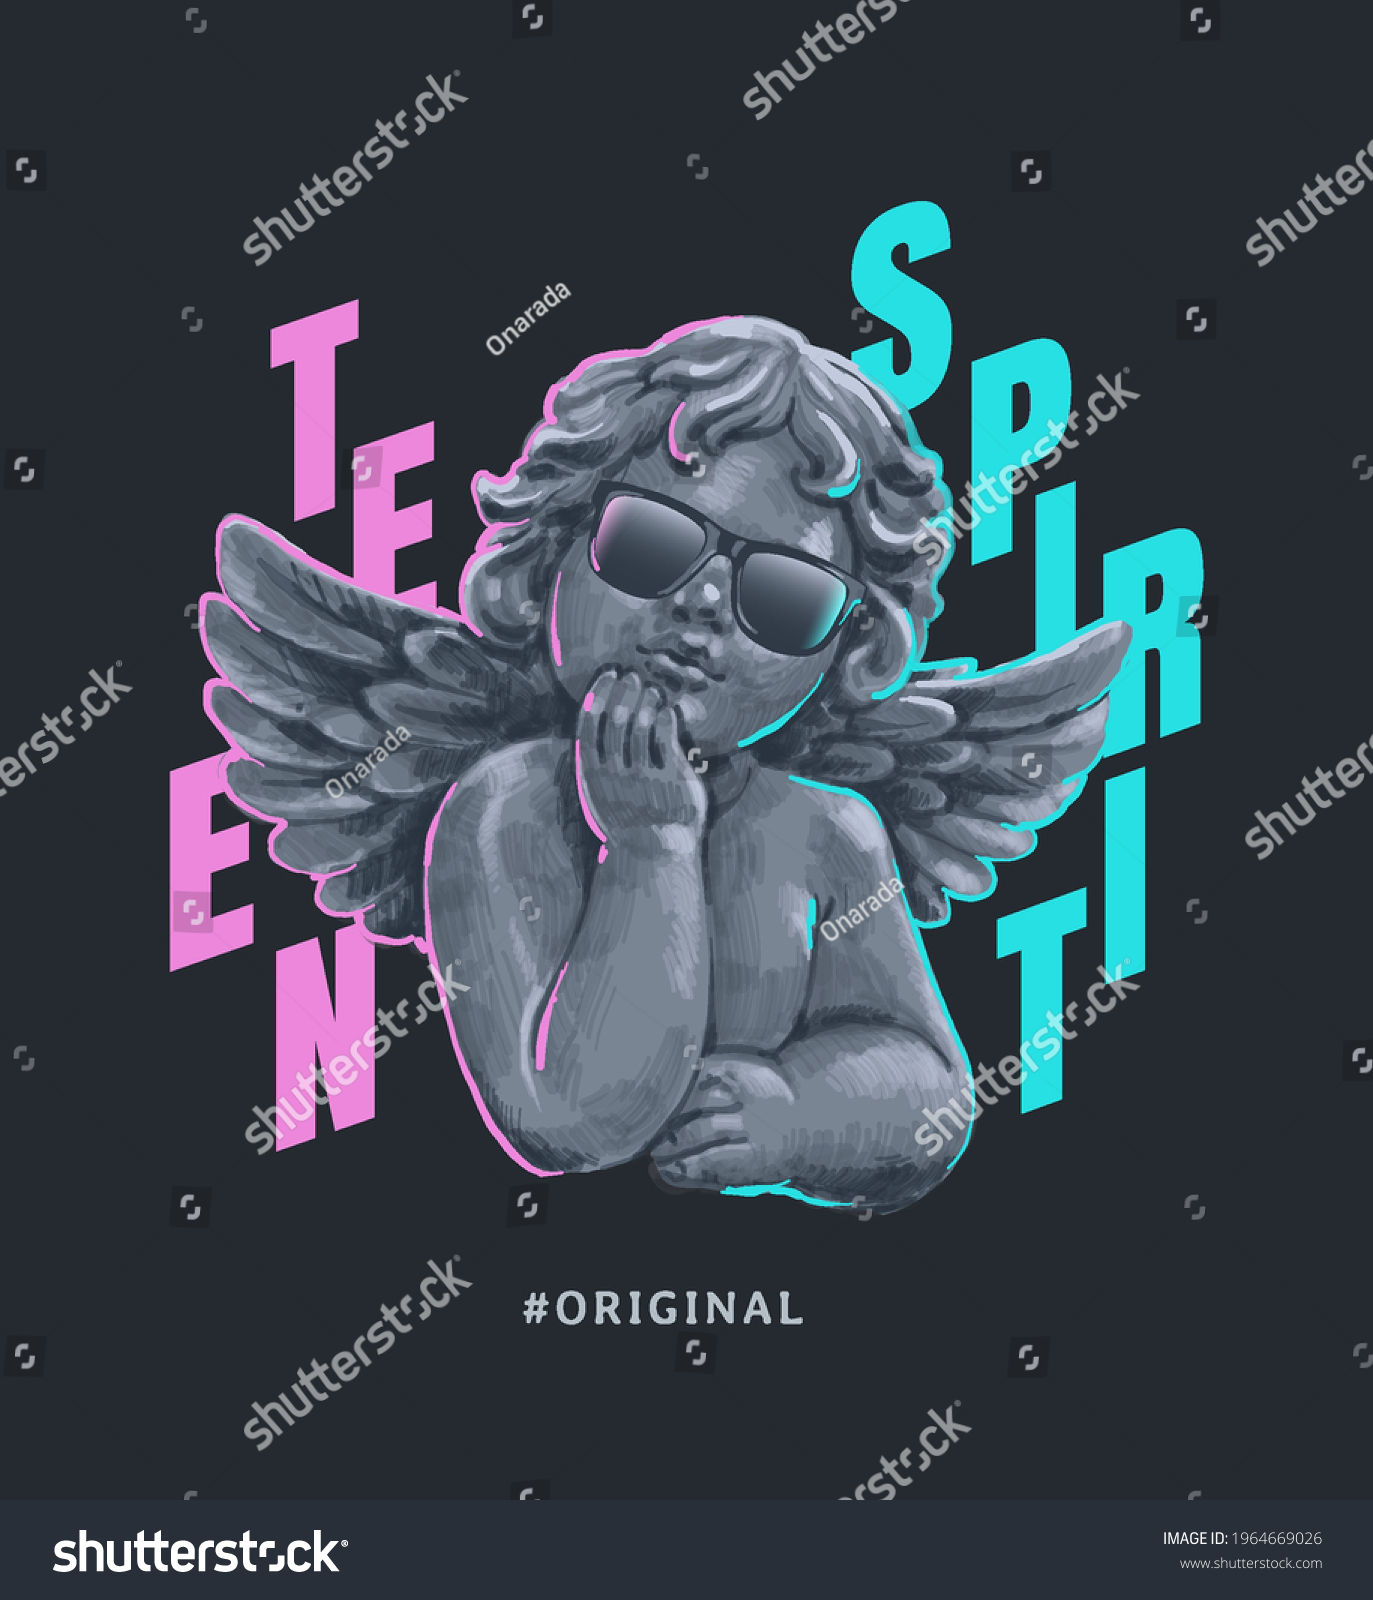 SVG of teen spirit slogan with antique baby angel in sunglasses,vector illustration for t-shirt. svg